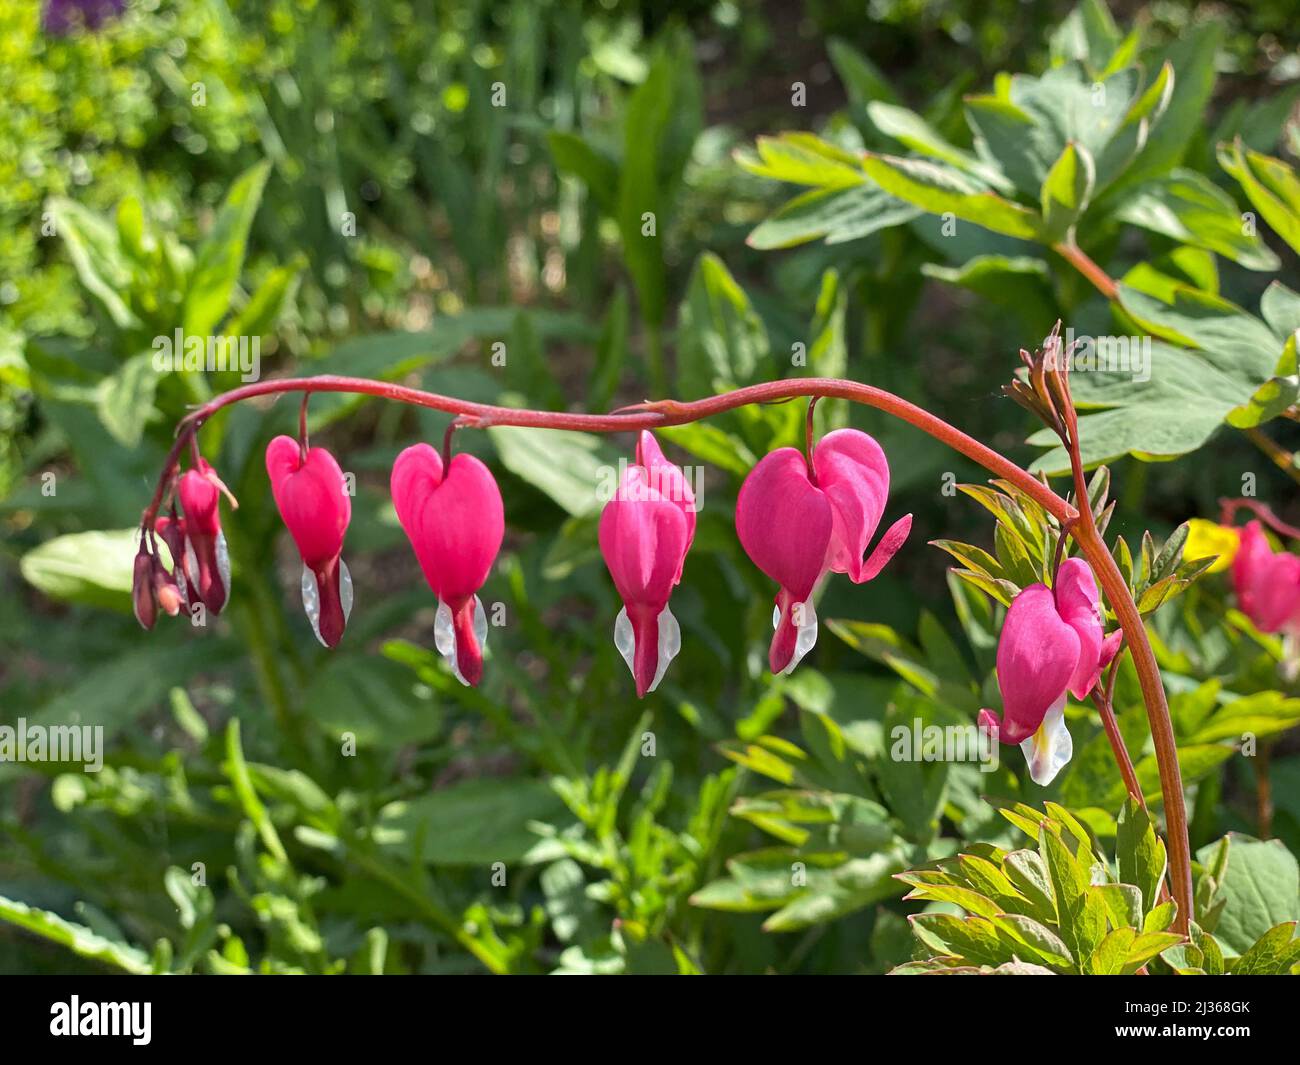 Asian bleeding heart, a branch with several flowers against a green background Stock Photo